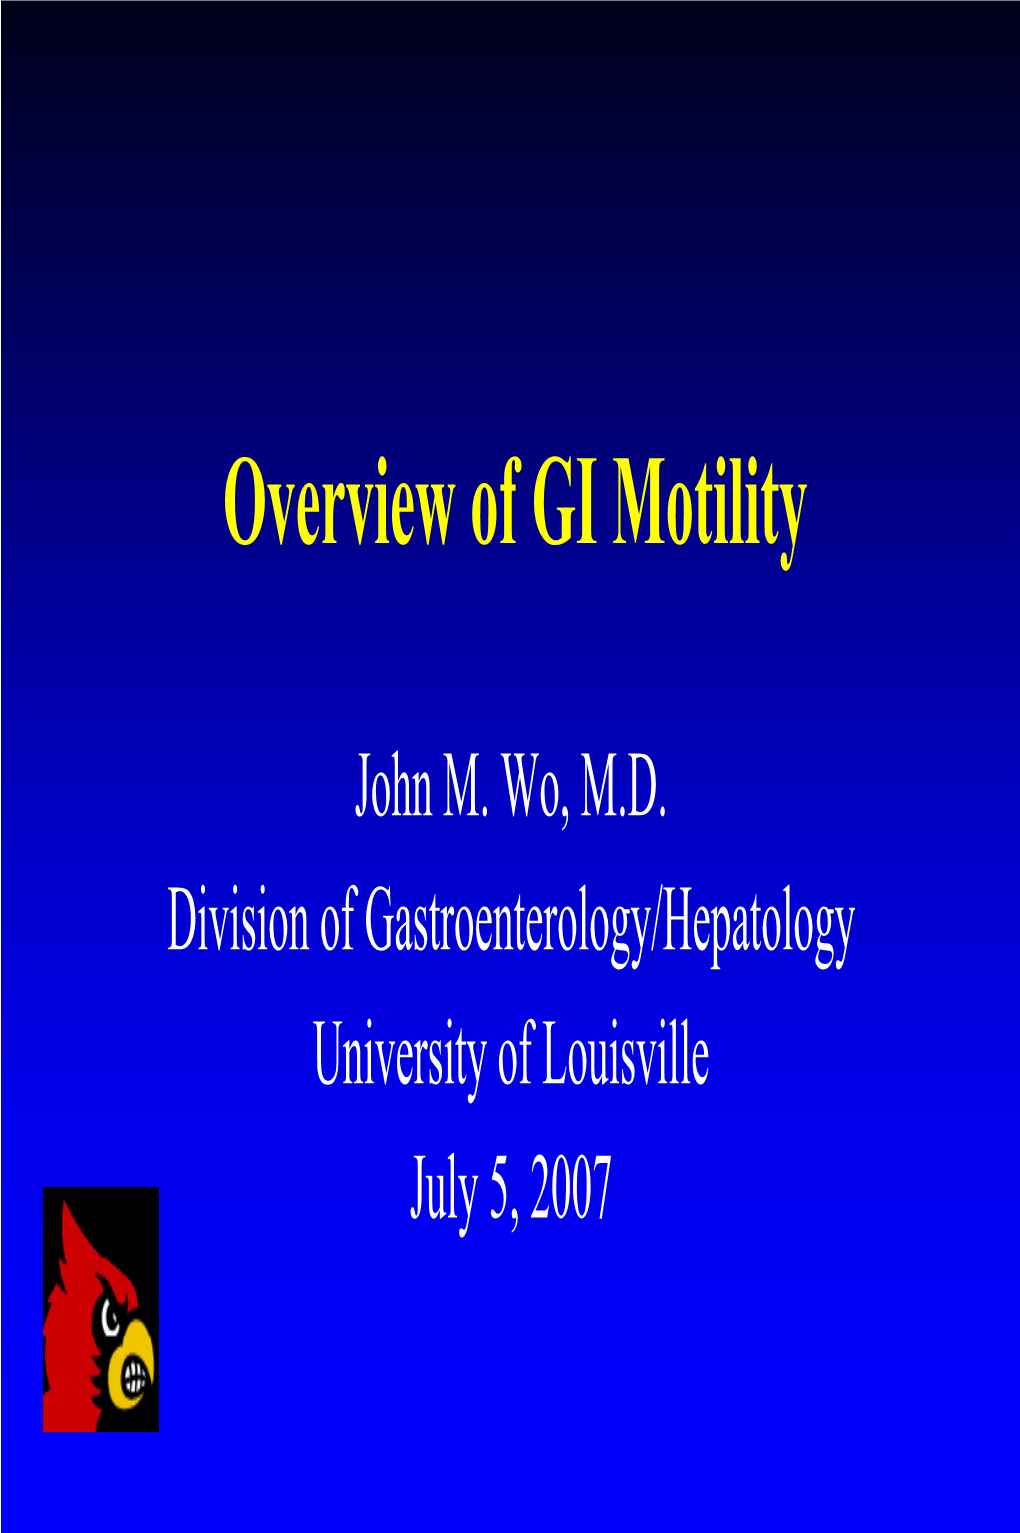 Overview of GI Motility (Wo 2007)